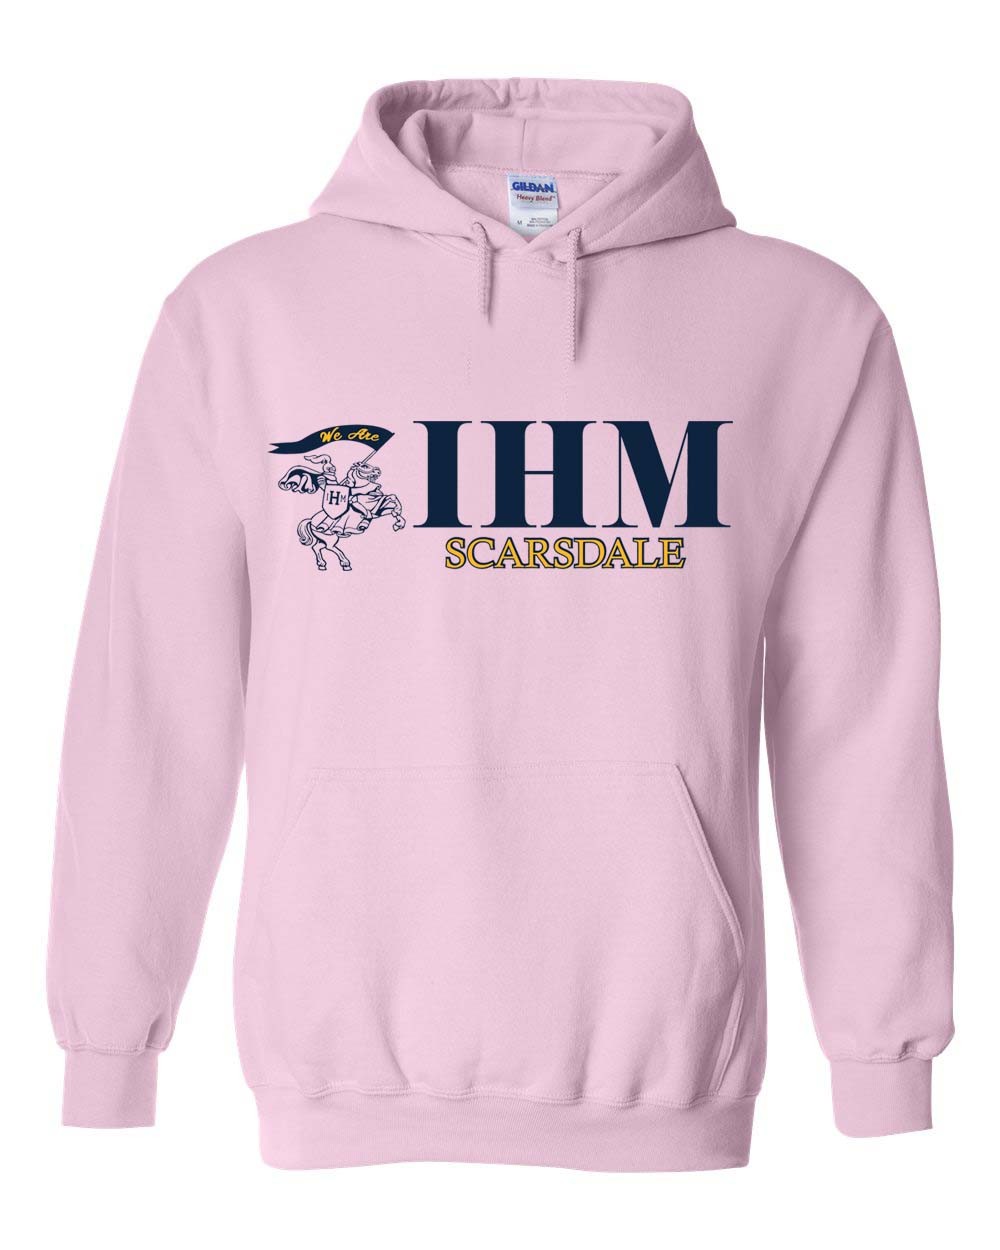 IHM Spirit Hoodie w/ Navy Knight Logo - Please allow 2-3 Weeks for Delivery